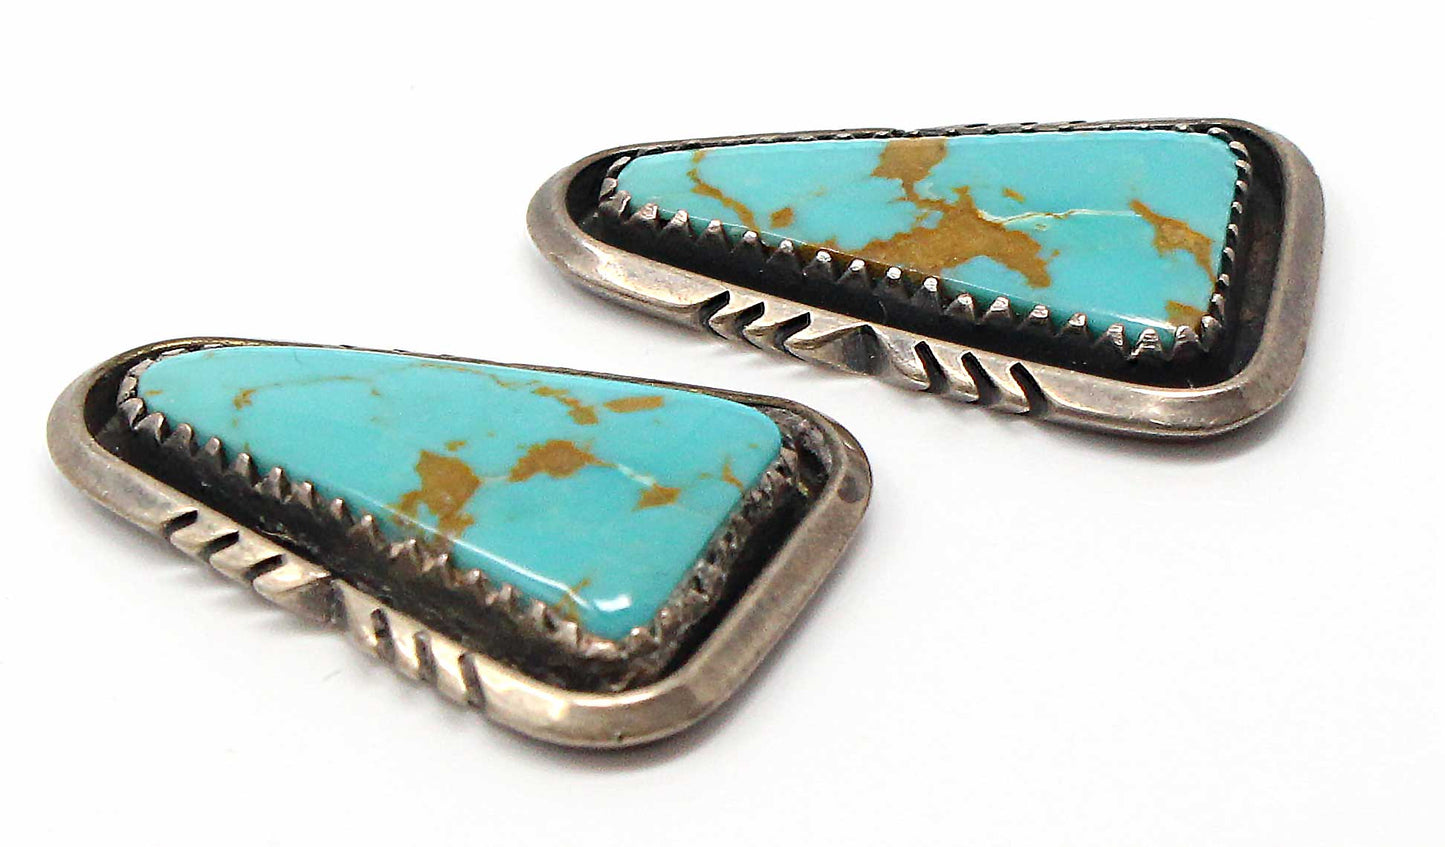 Natural Morenci Turquoise Earrings